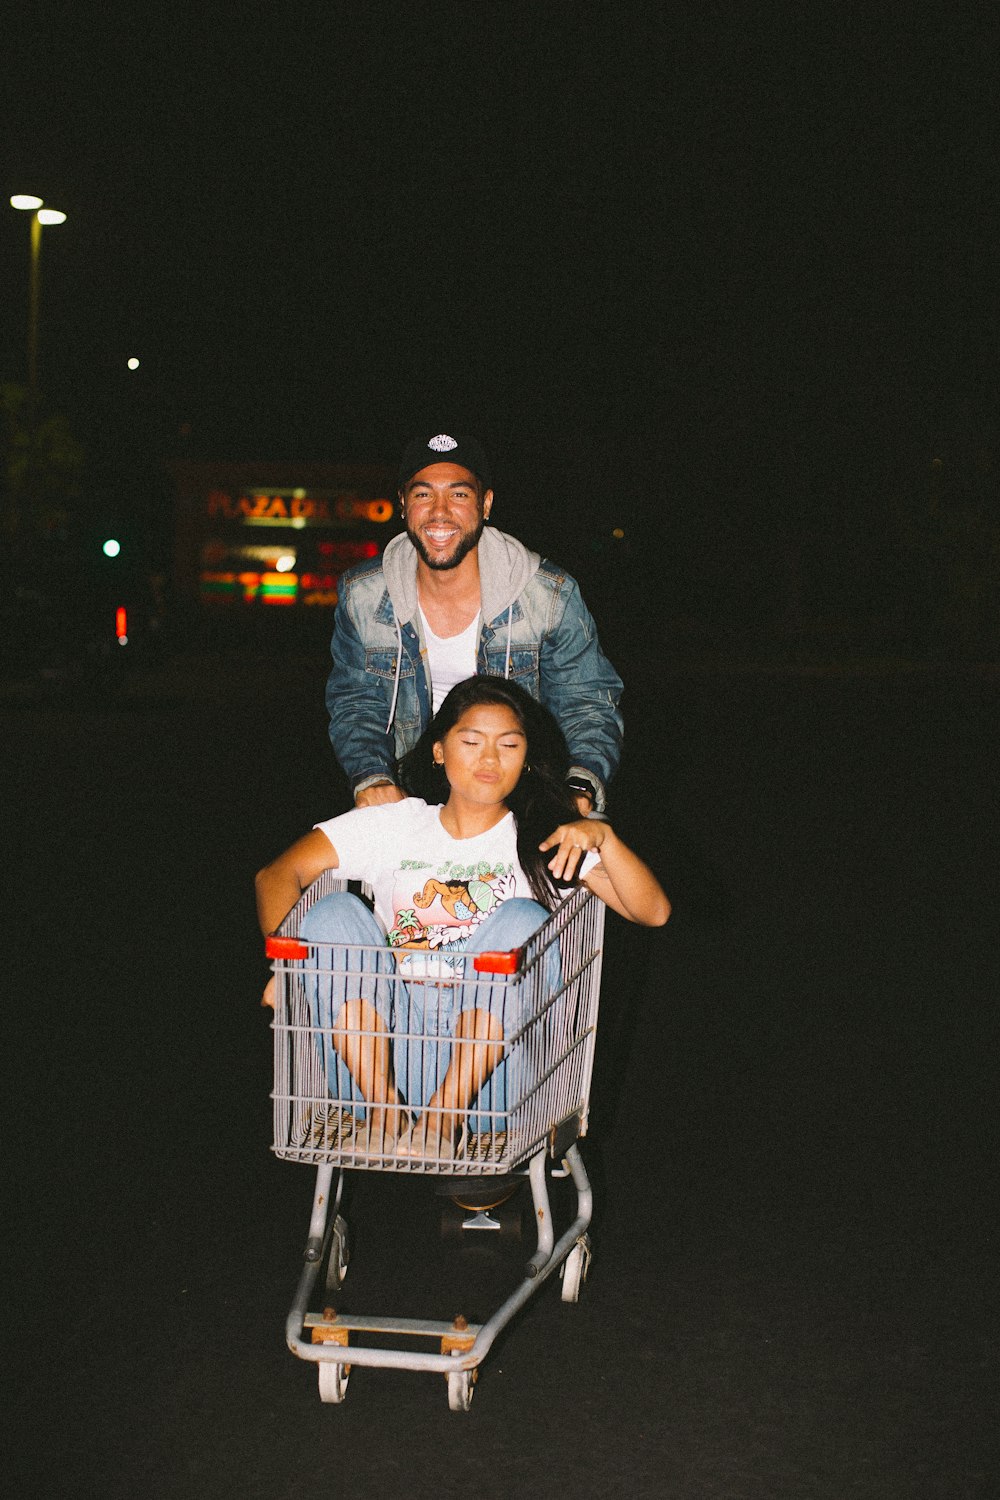 woman in shopping cart pulled by a man